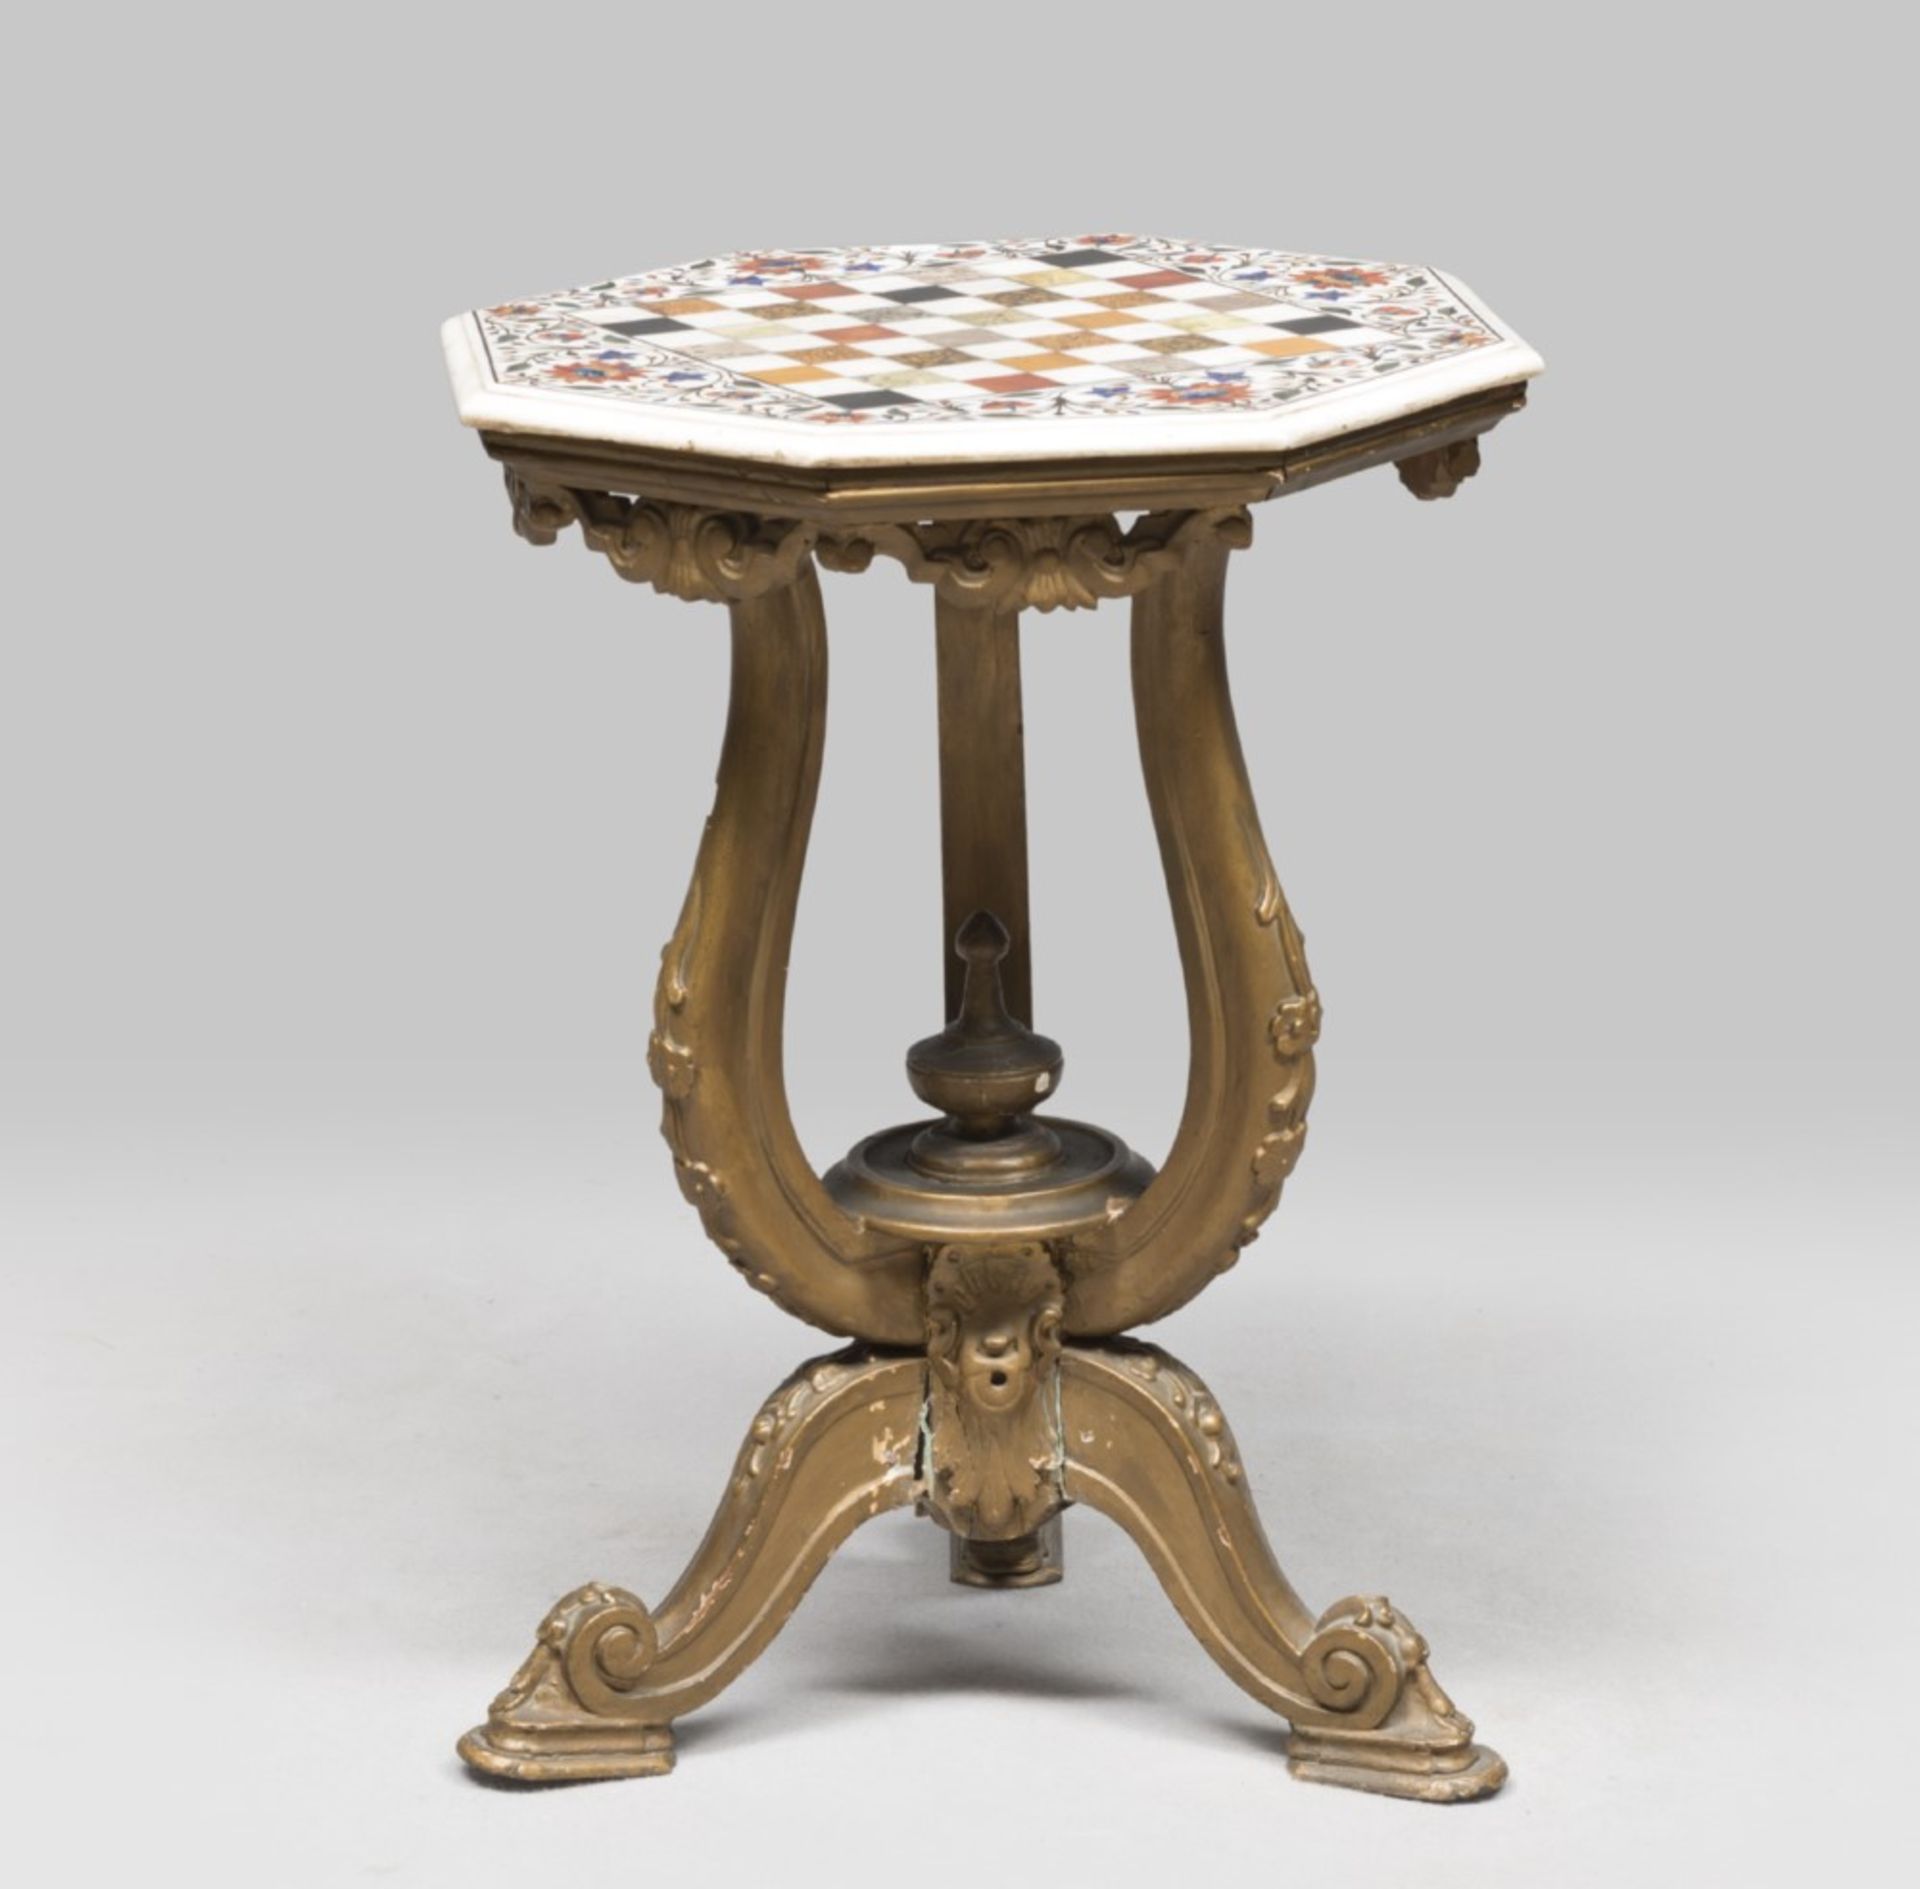 GILTWOOD TABLE, ROME 19TH CENTURY with octagonal top in uncrusted marbles on the Board. Legs and